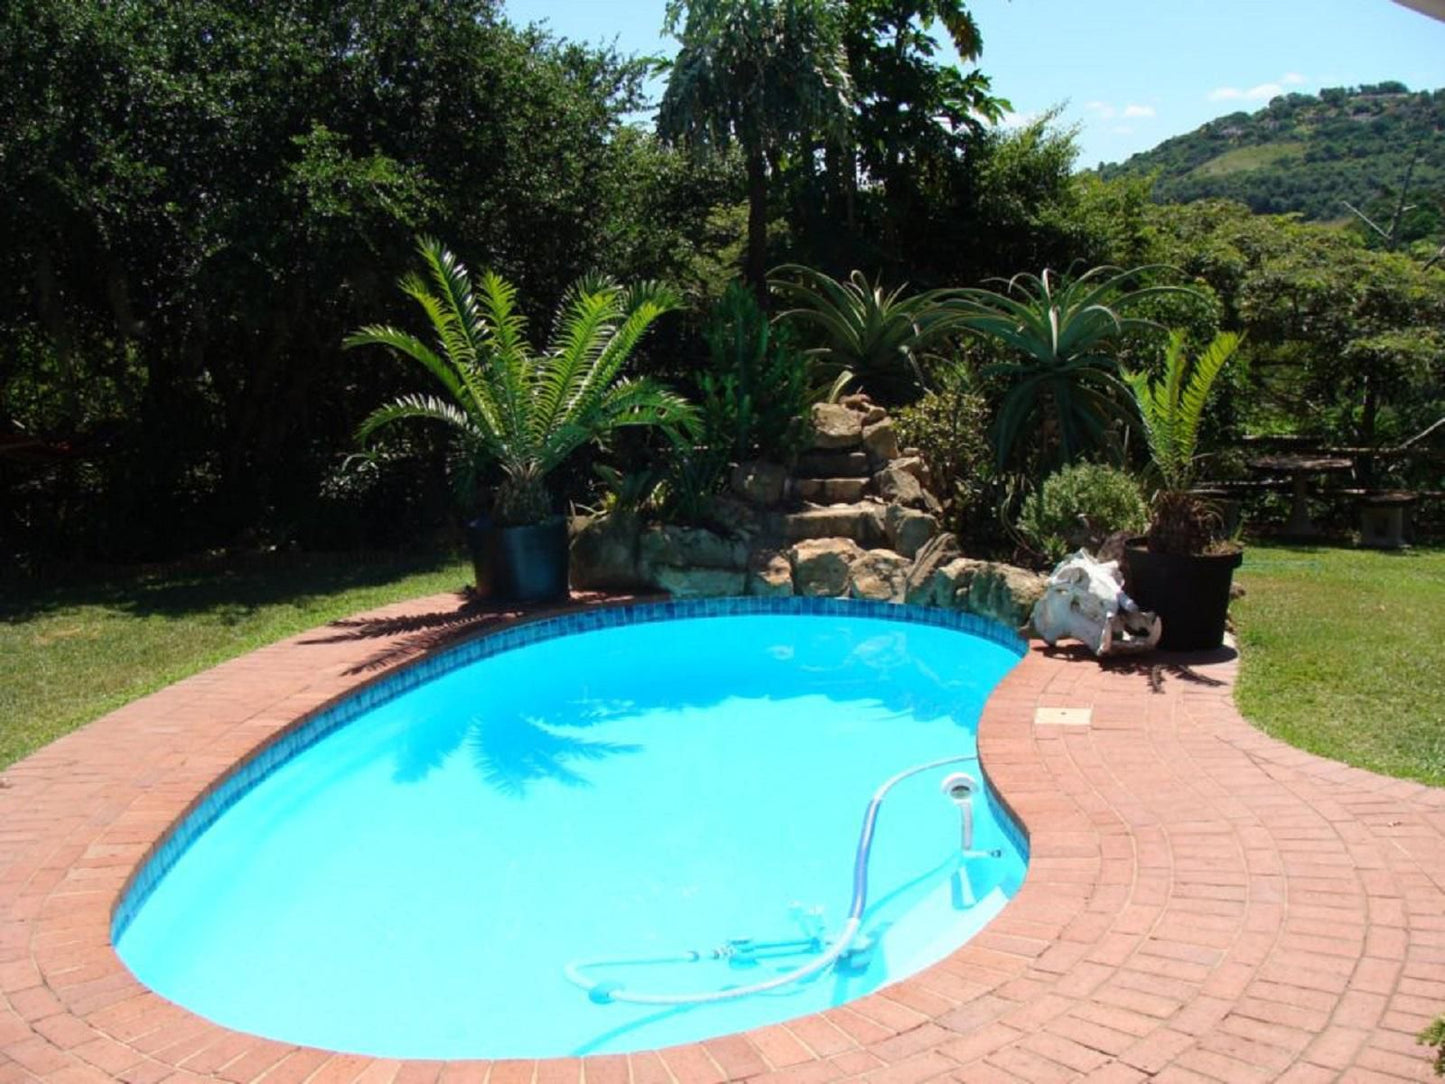 Roosfontein Bed And Breakfast And Conference Room Queensburgh Durban Kwazulu Natal South Africa Complementary Colors, Palm Tree, Plant, Nature, Wood, Garden, Swimming Pool